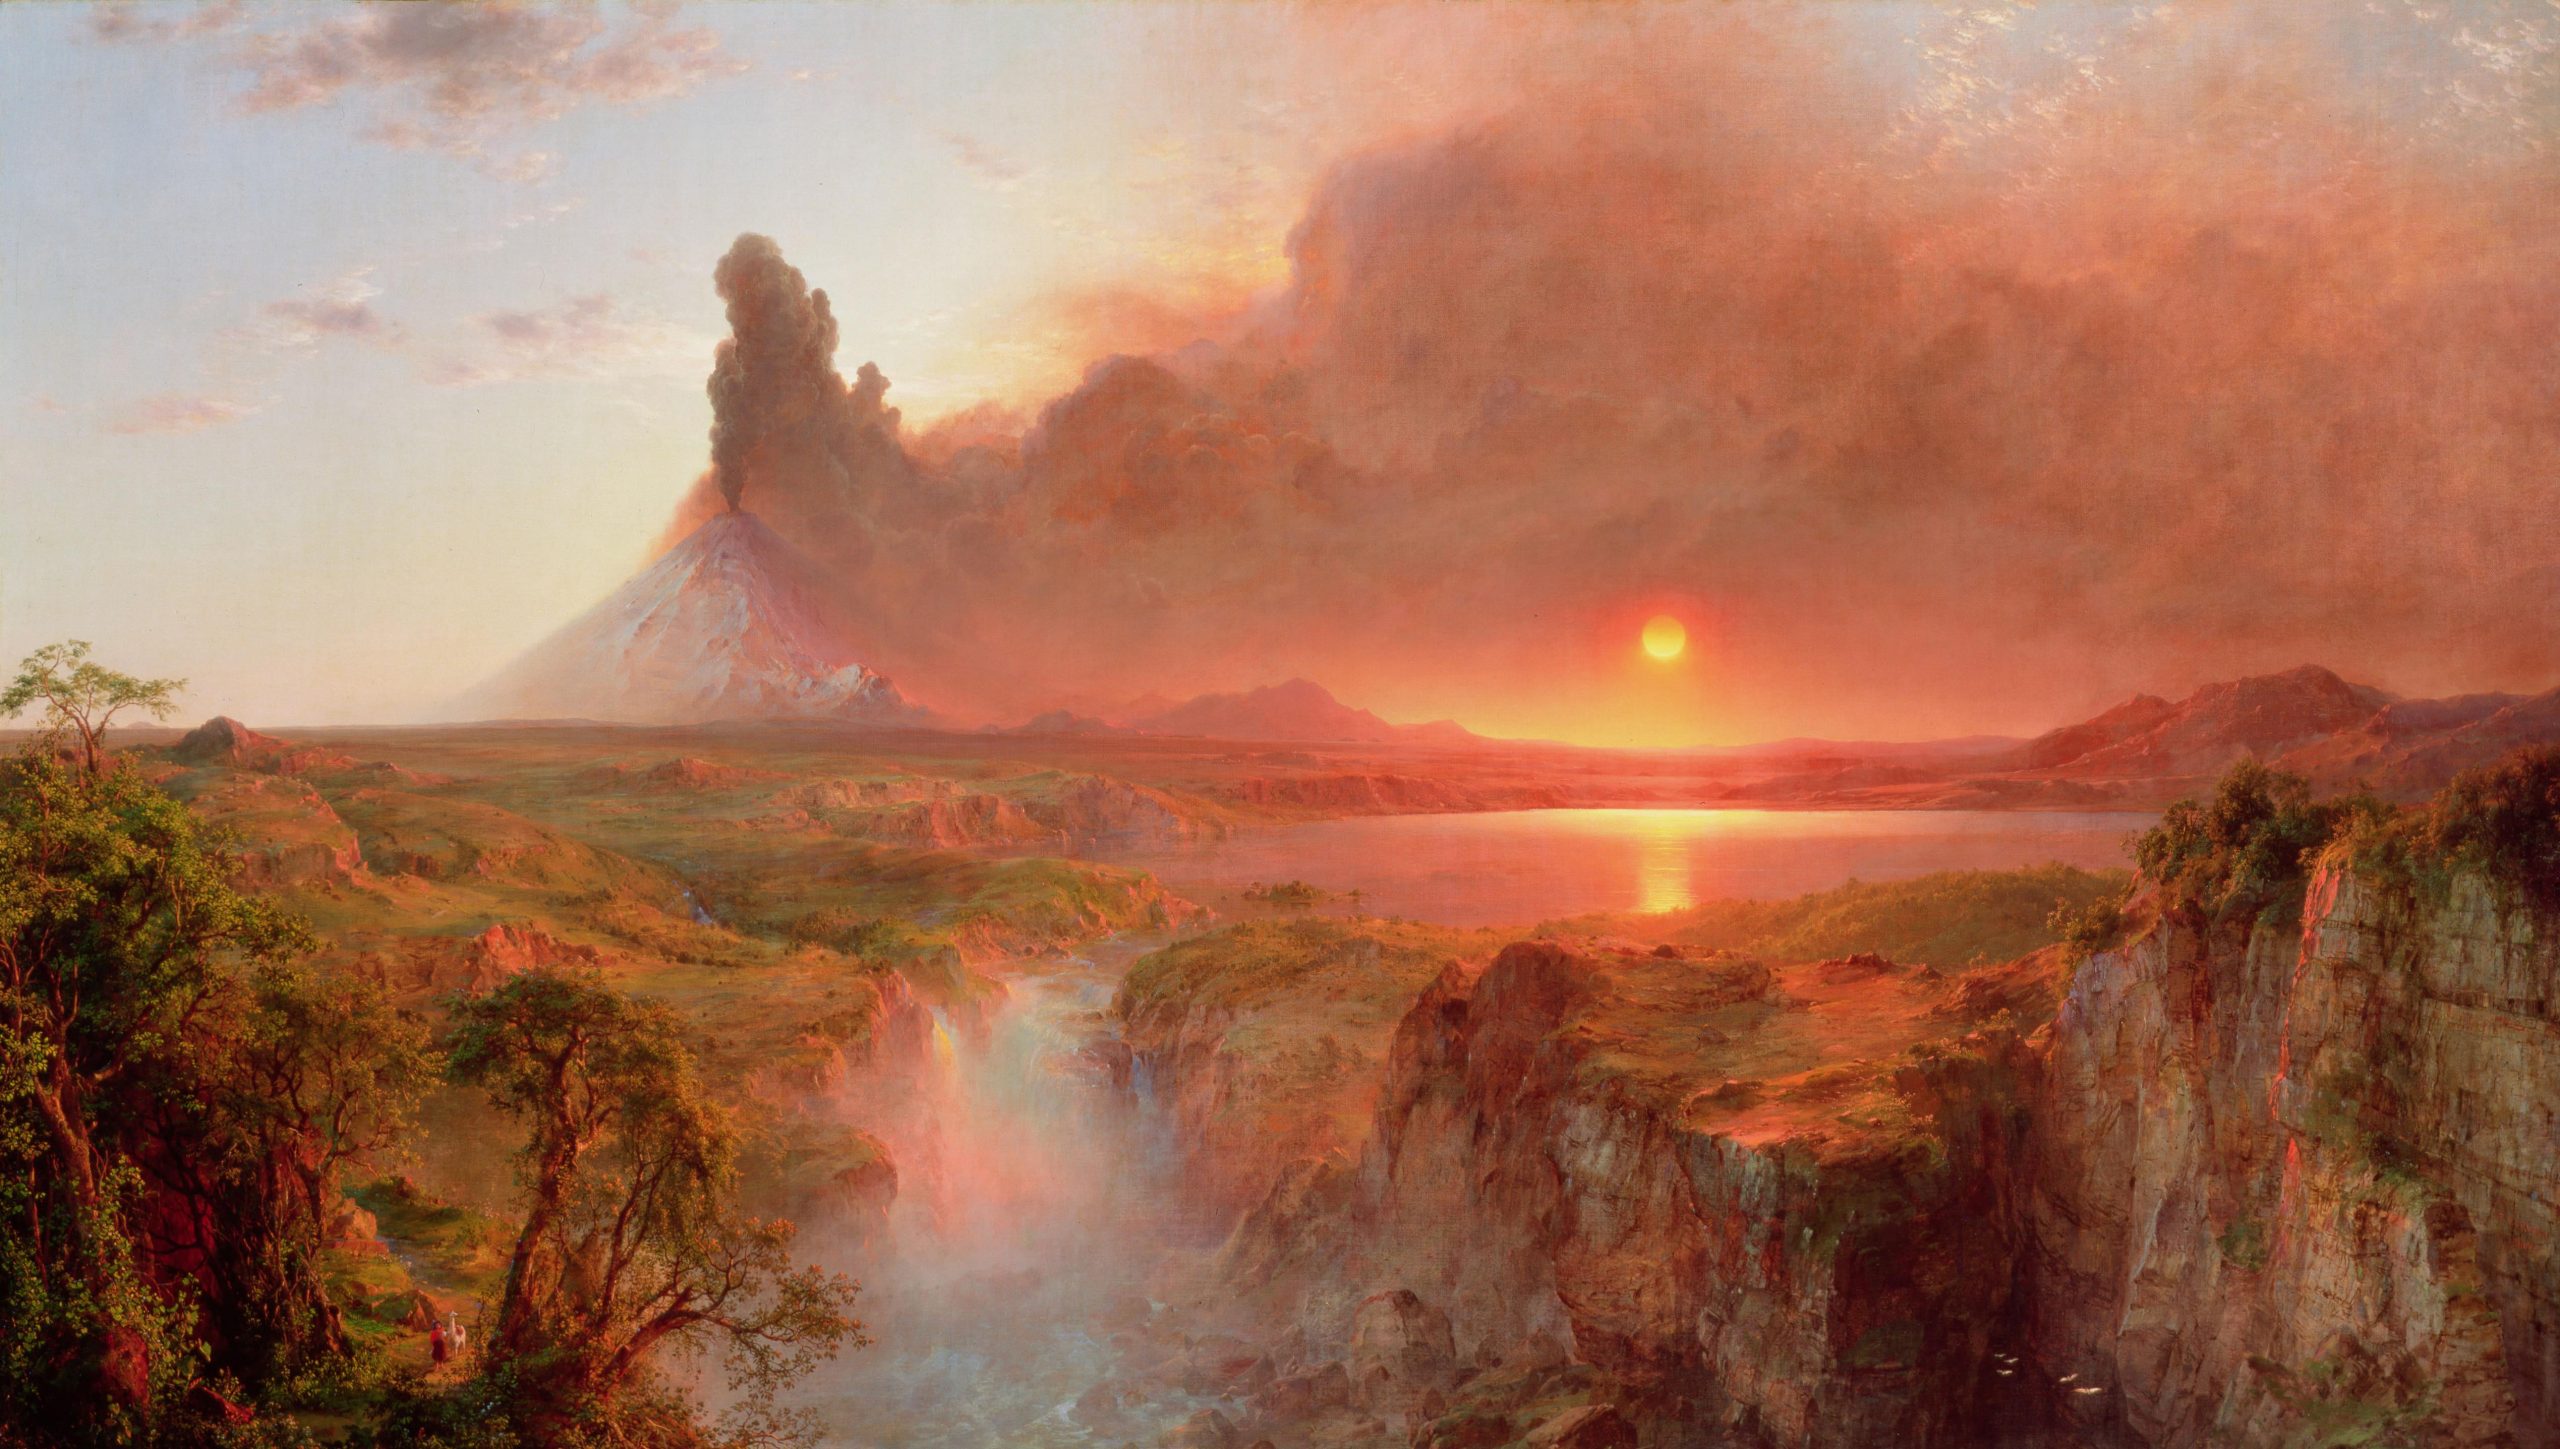 A painting showing a jagged cliff and valley. A large volcano erupts the background. The sun is setting and casting a reflection on a lake.